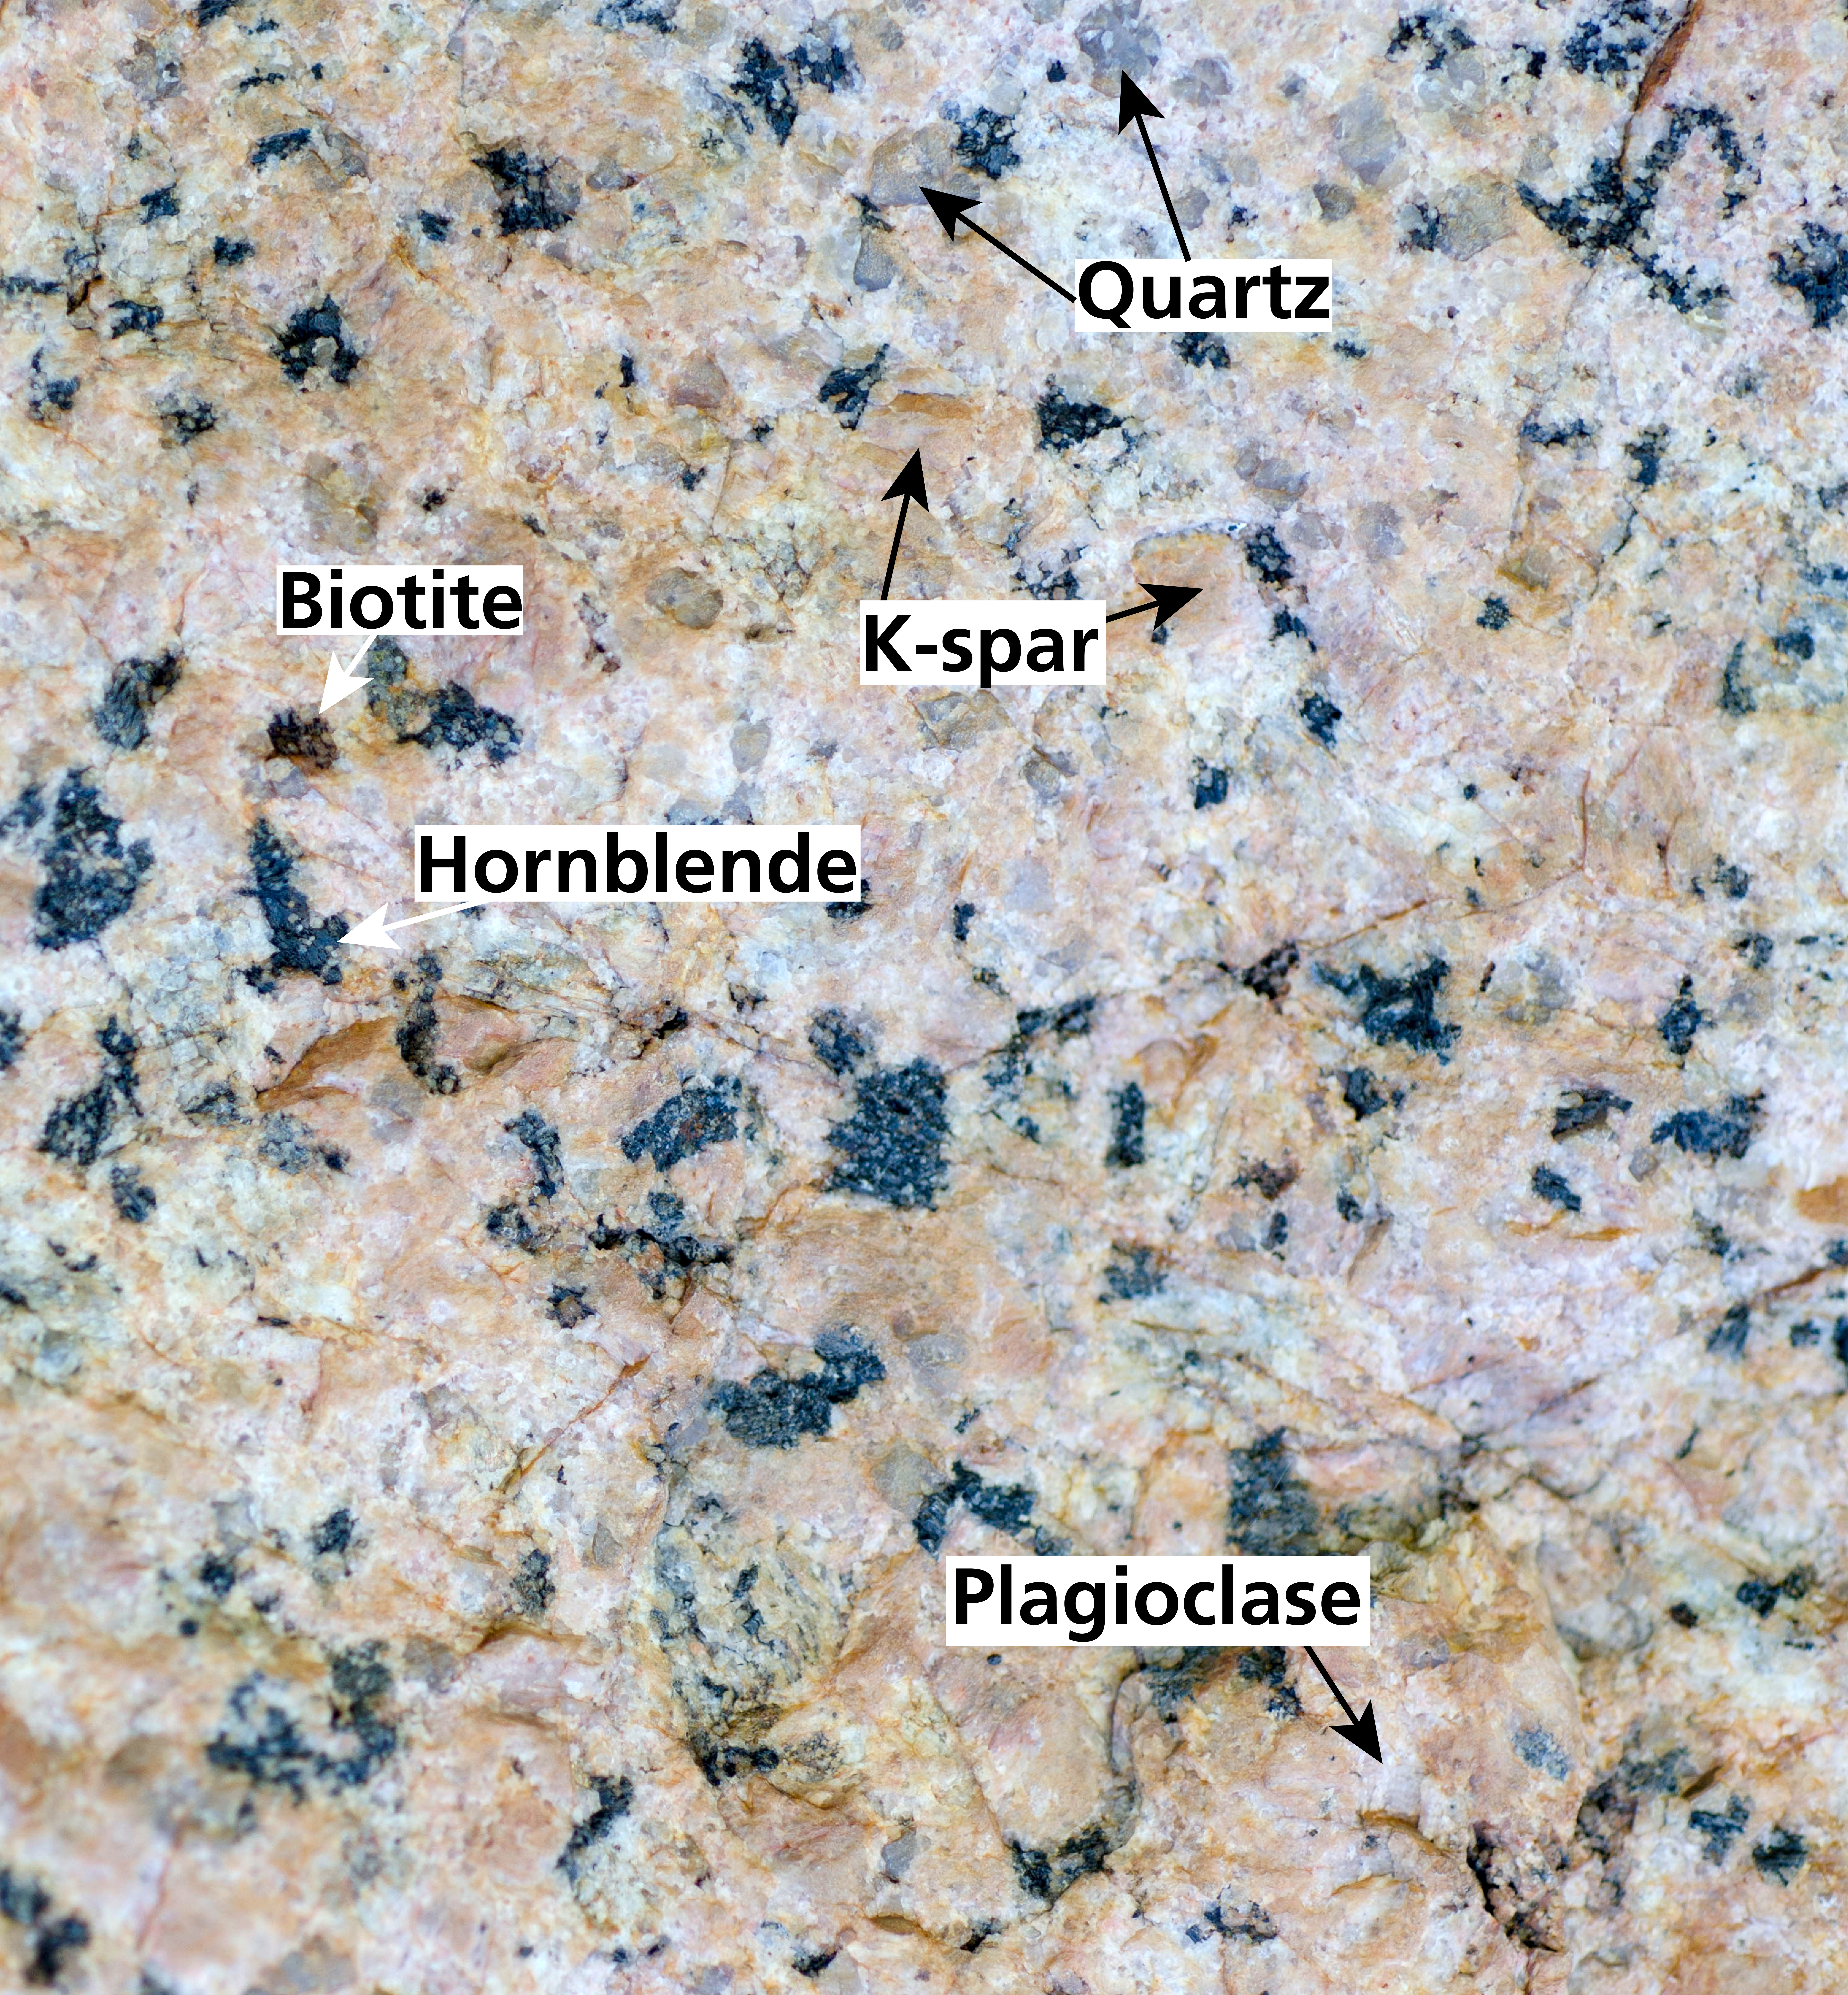 A zoomed in image of the Pikes Peak Granite showing the minerals, the minerals are labeled.